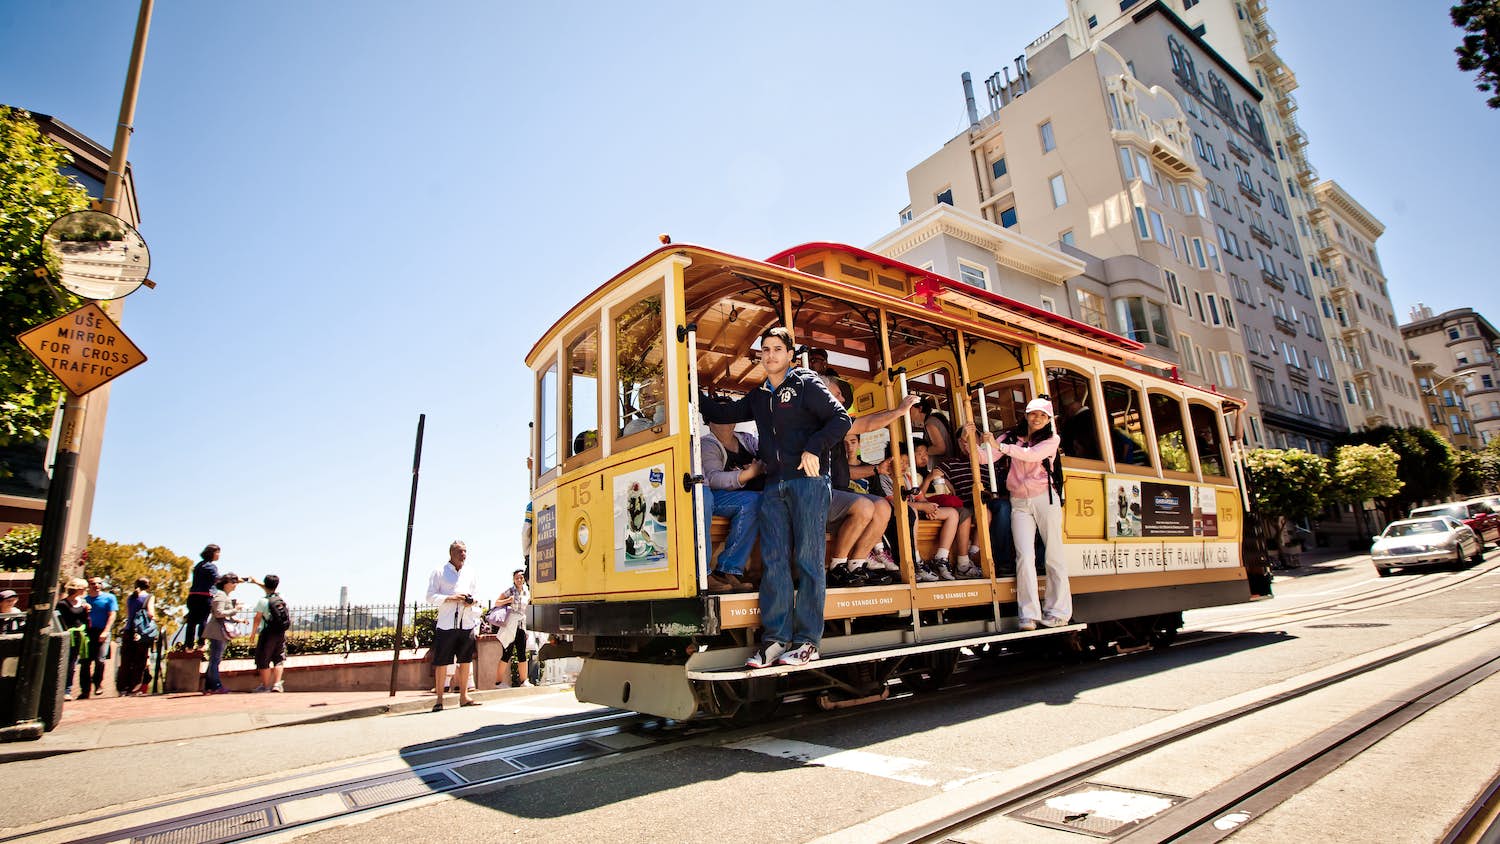 Top things to do in San Francisco